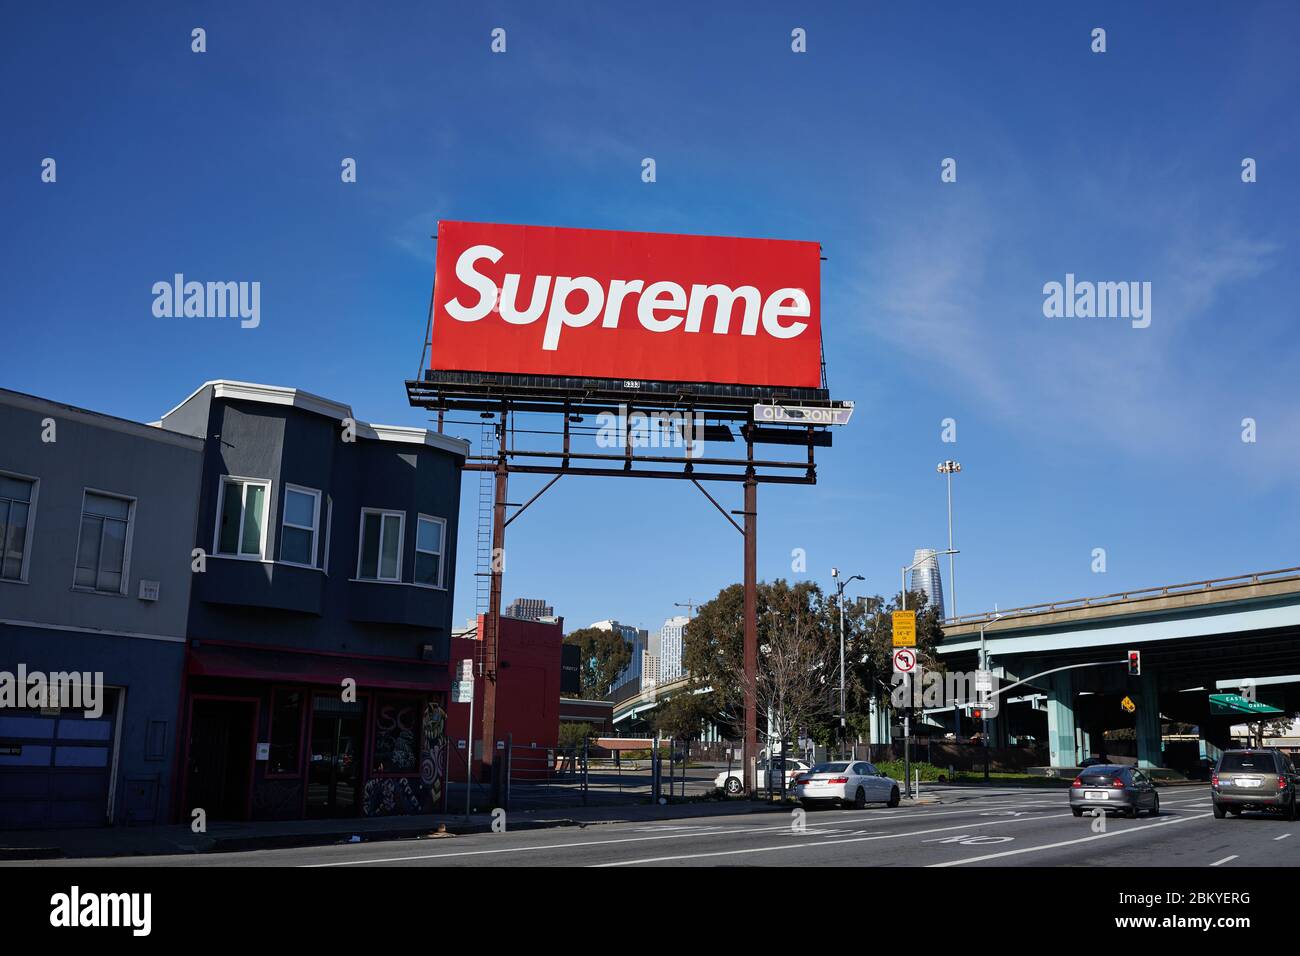 American skateboarding shop and clothing brand Supreme's billboard is seen in the SoMa neighborhood of San Francisco, California. Stock Photo